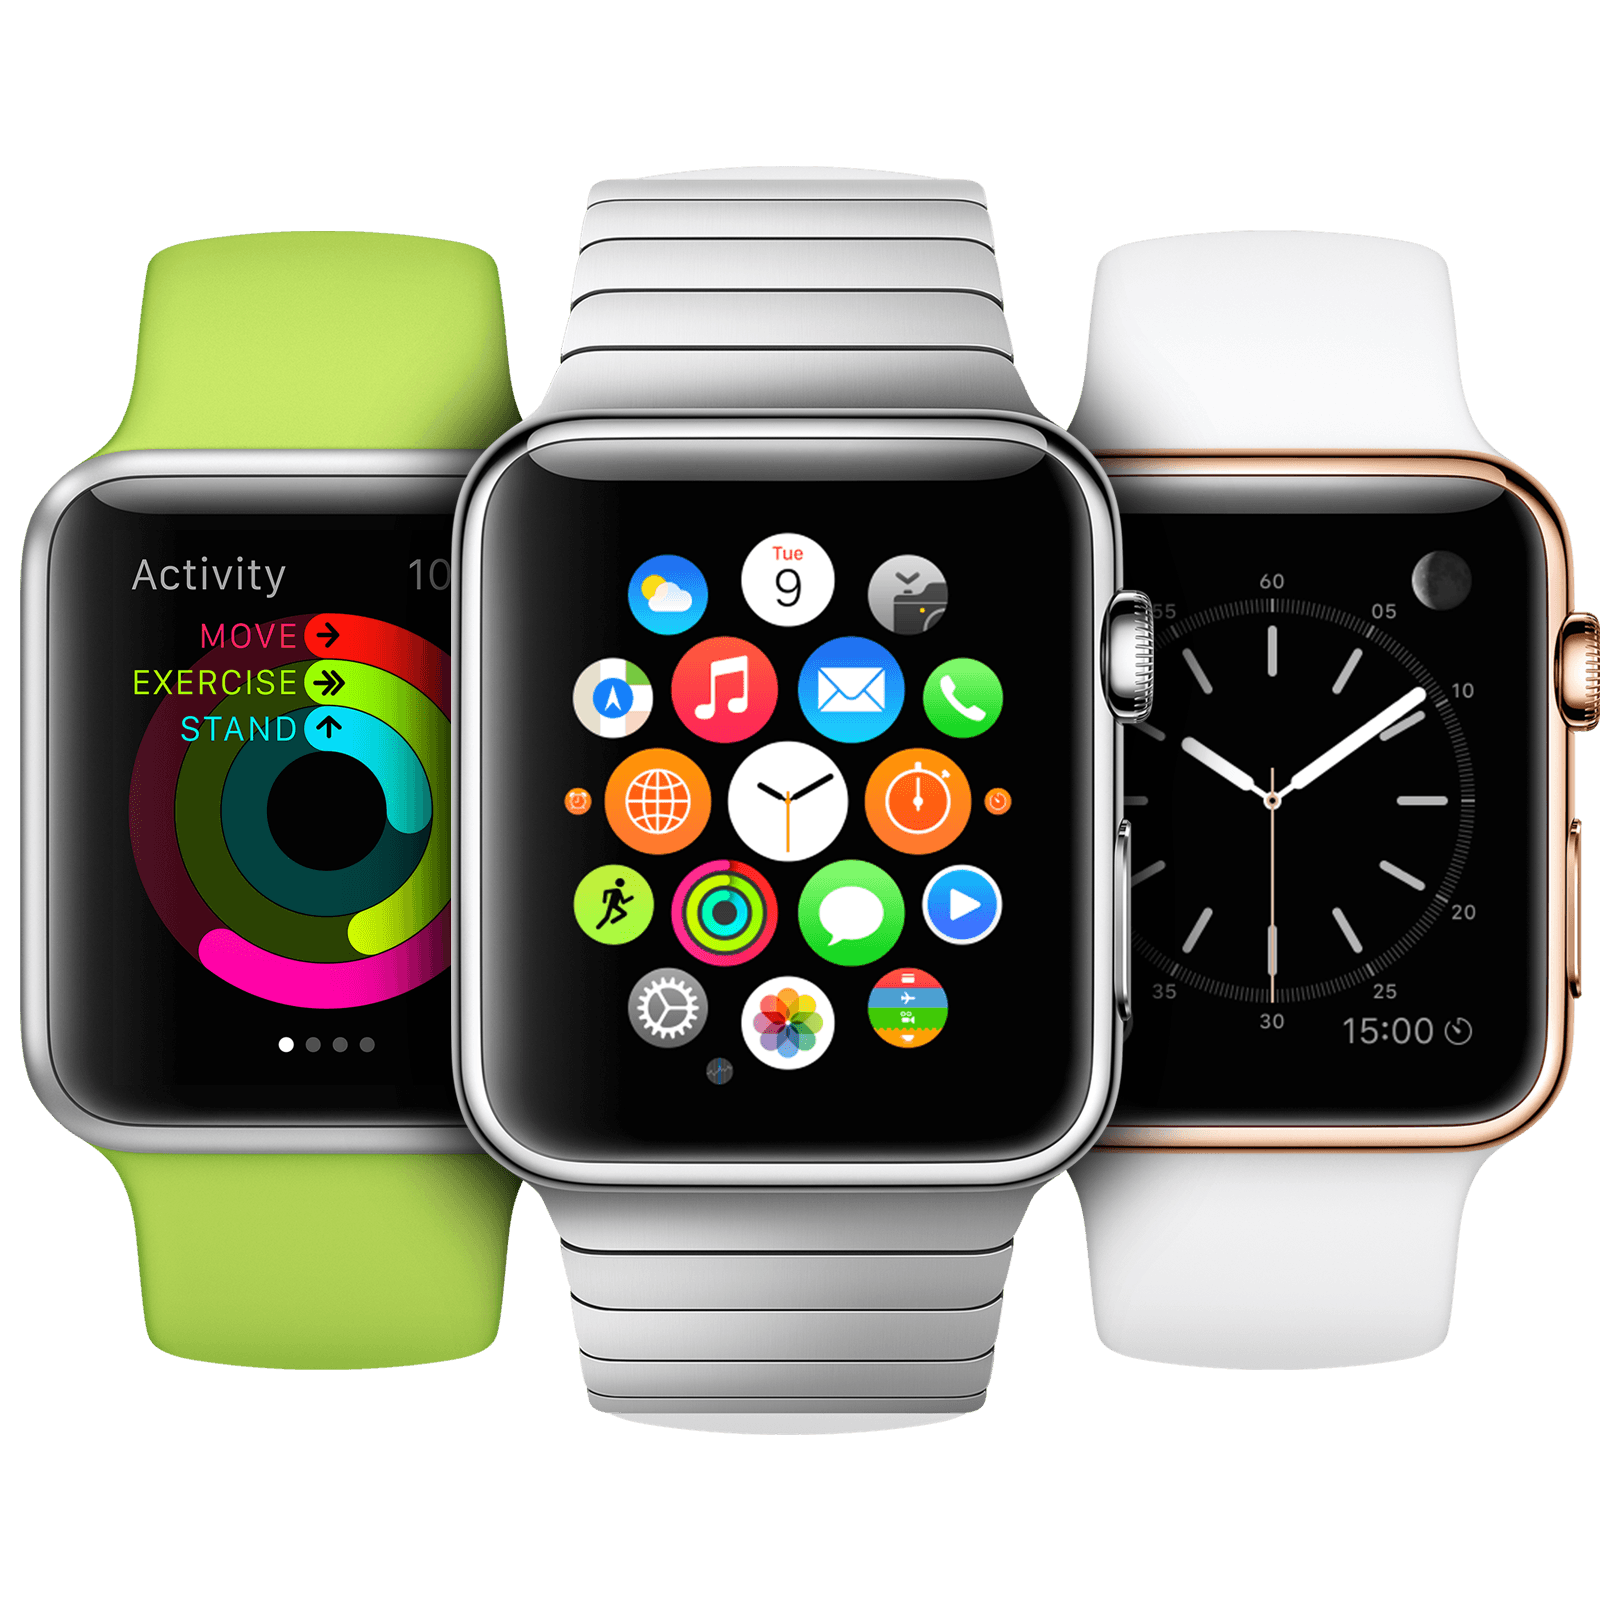 http://www.imore.com/sites/imore.com/files/styles/large/public/topic_images/2015/topic-apple-watch-all.png?itok=OUtlCphV